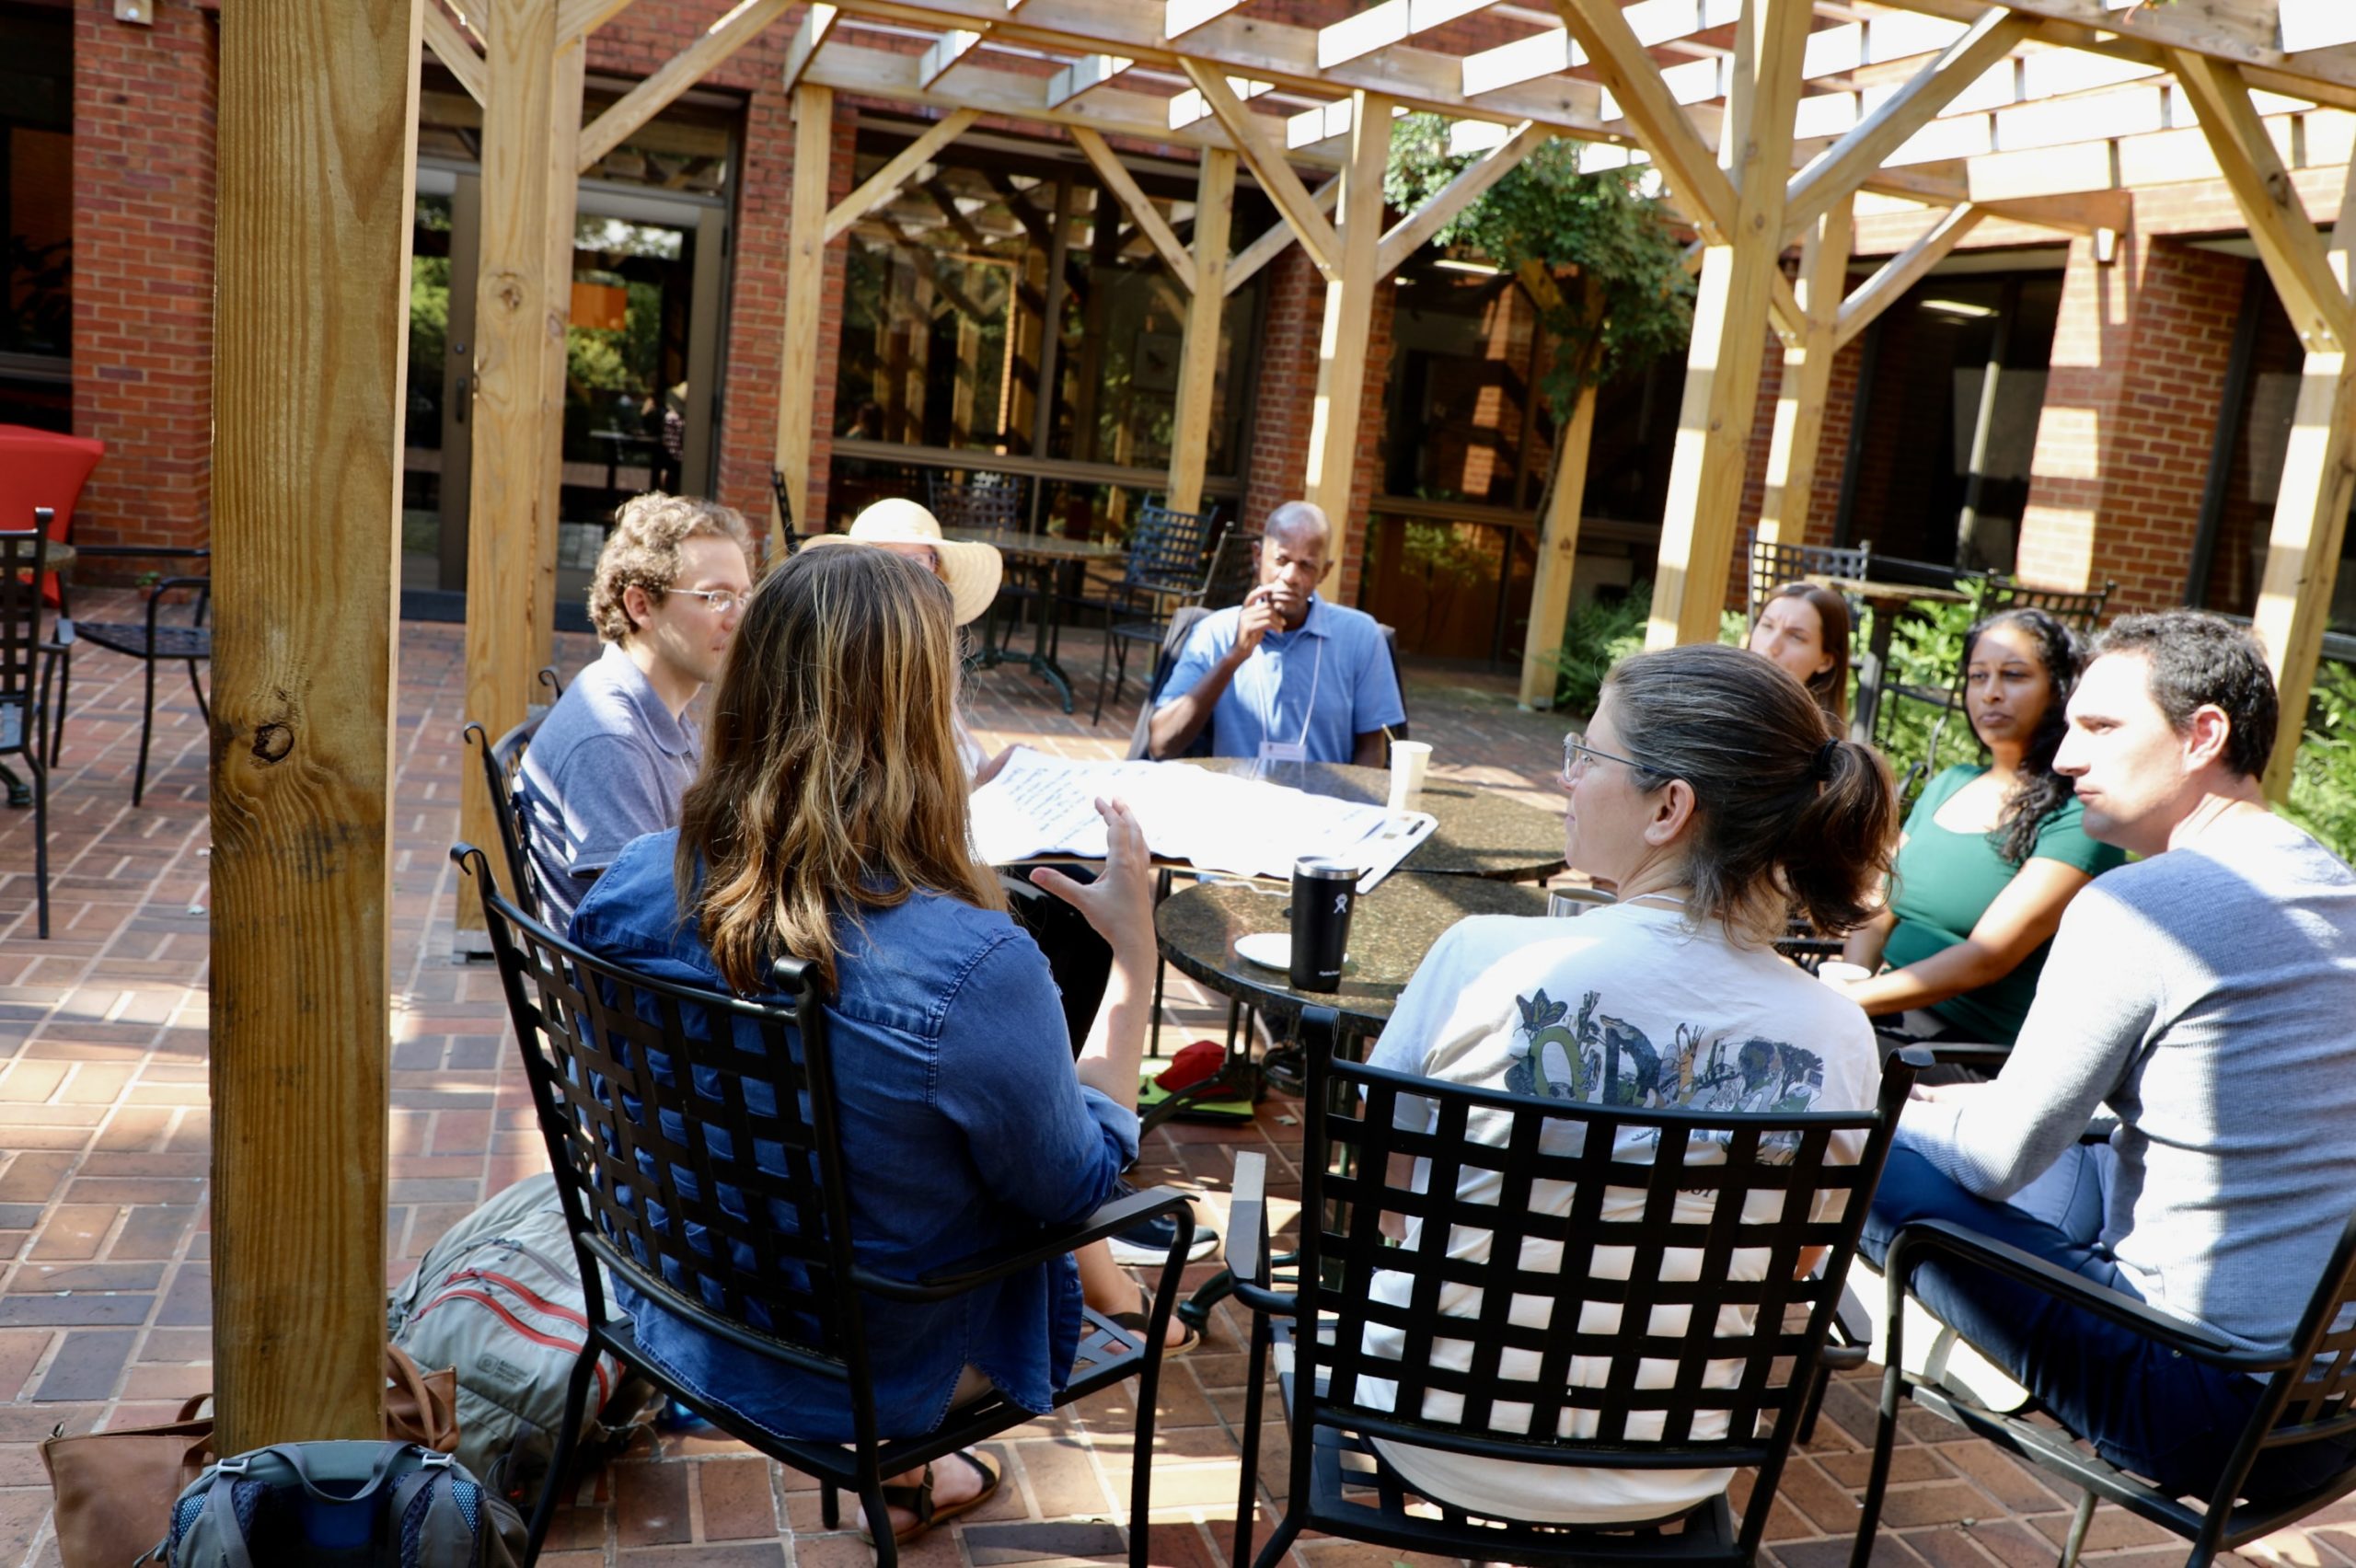 A group discusses something outside in a sunny courtyard.